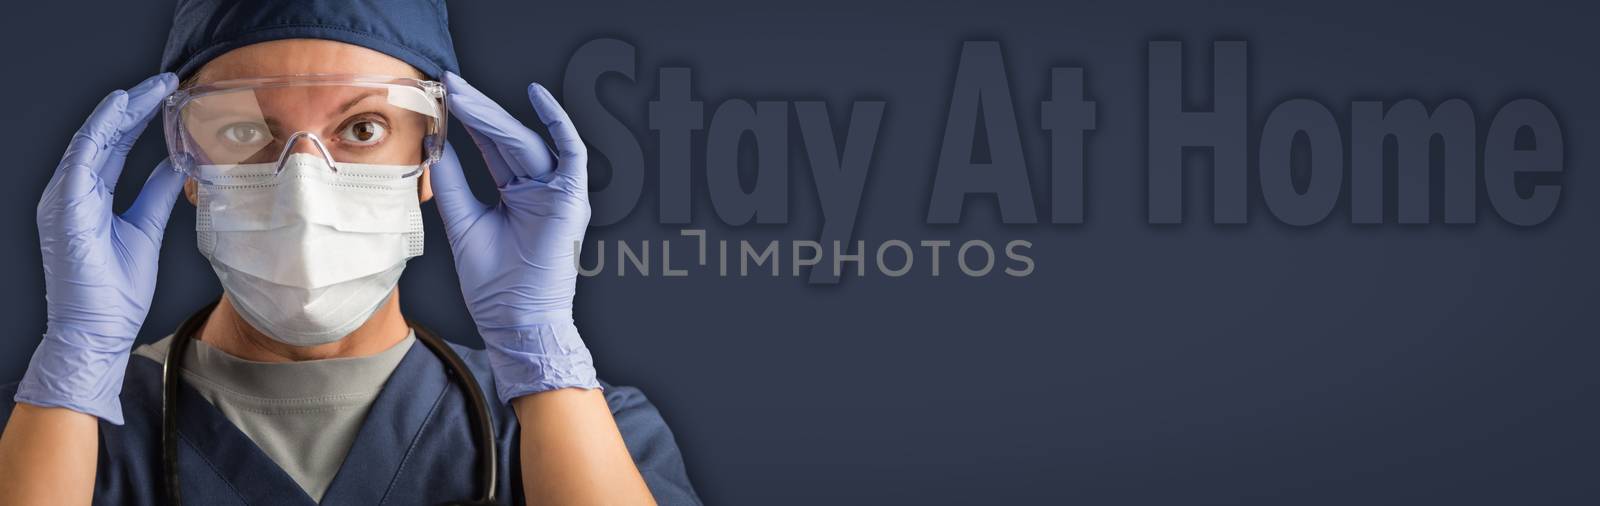 Banner of Female Doctor or Nurse In Medical Face Mask and Protective Gear With Stay At Home Text Behind. by Feverpitched